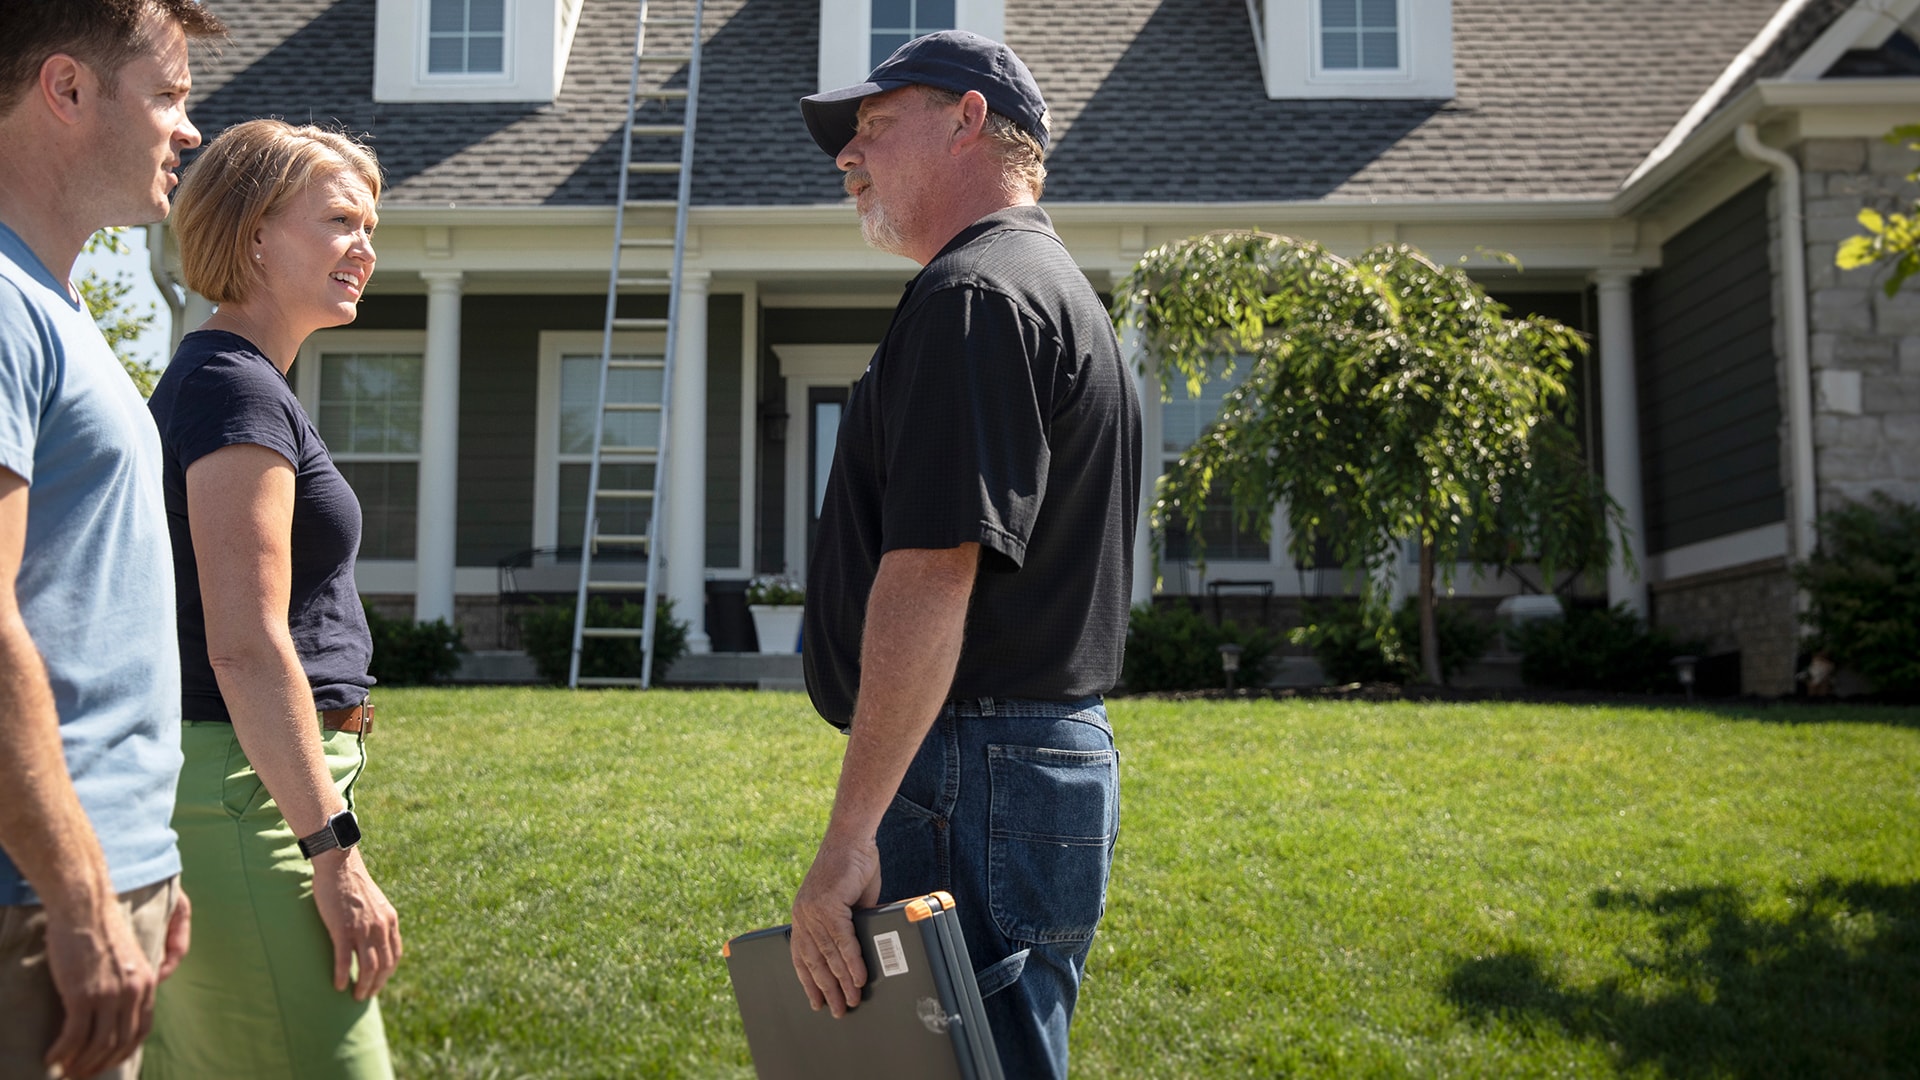 Roofing contractor outside home discussing roof insurance claim